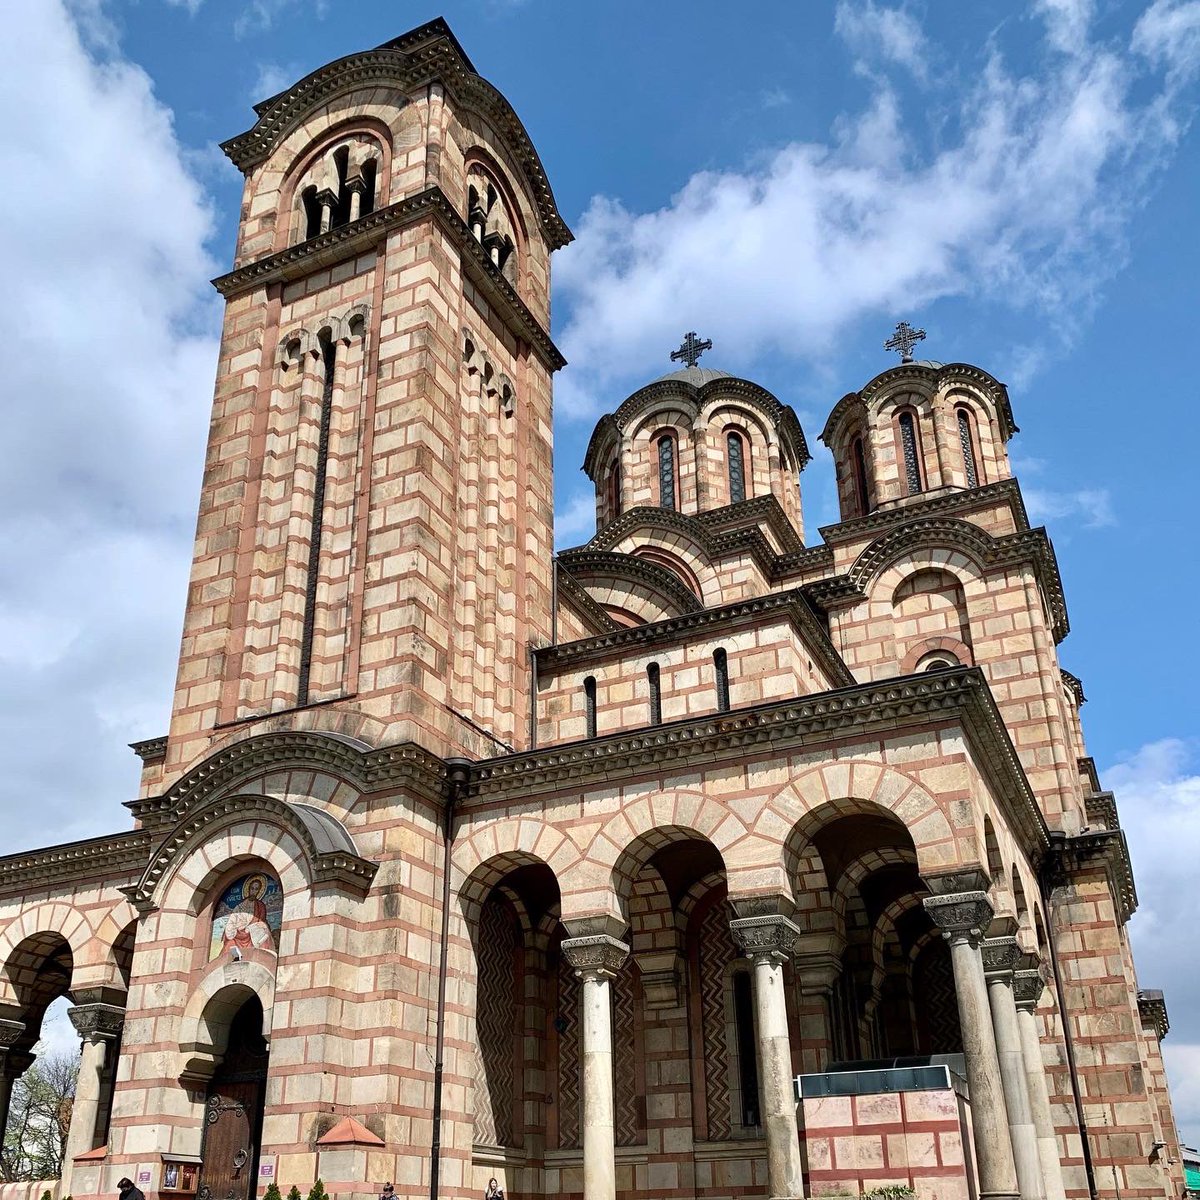 St. Mark’s Church is located in the beautiful Tasmajdan Park.
•
A great way to spend time in this beautiful city.
•
#Belgrade #Serbia  #StMarksChurch  #ontheroad #nomadtravel #digitalnomad #travel2021  #travelwithus #instatravel #weierarewenow 
#weierouttahere 
#SafeTravels✈️🌎